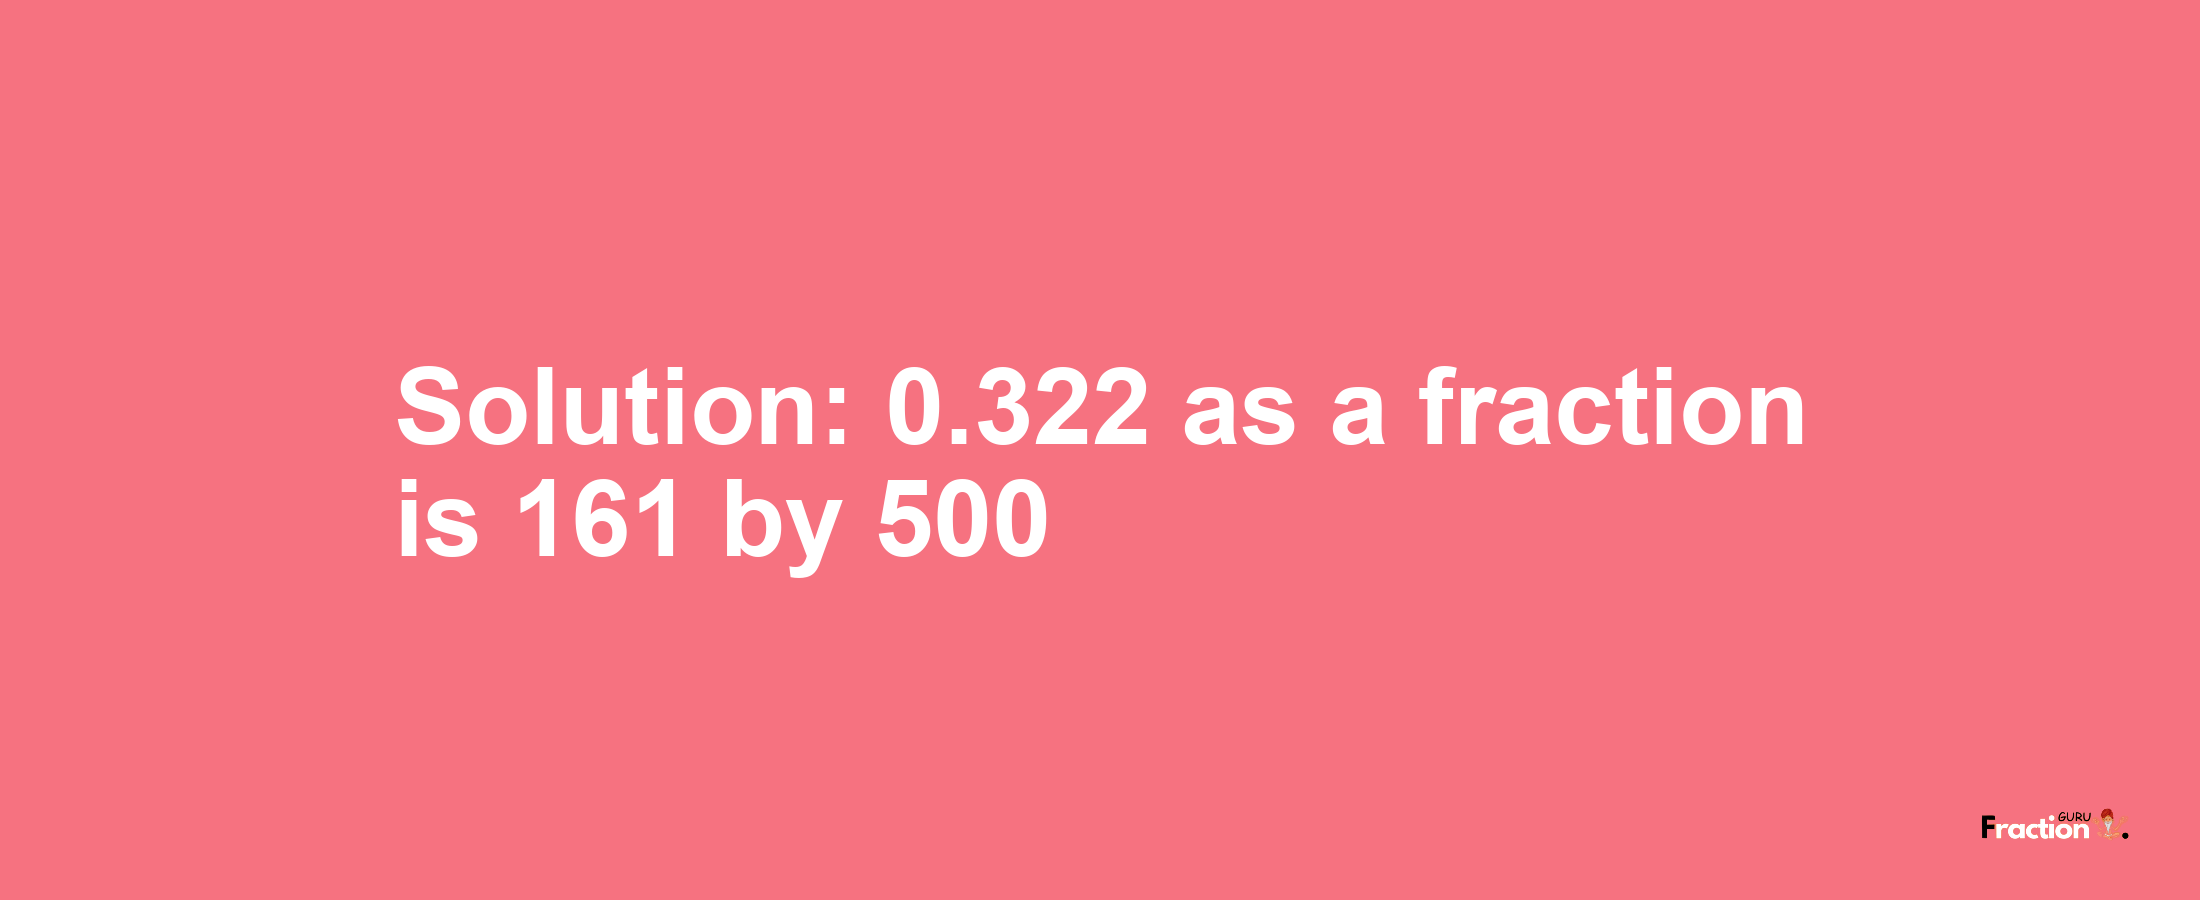 Solution:0.322 as a fraction is 161/500